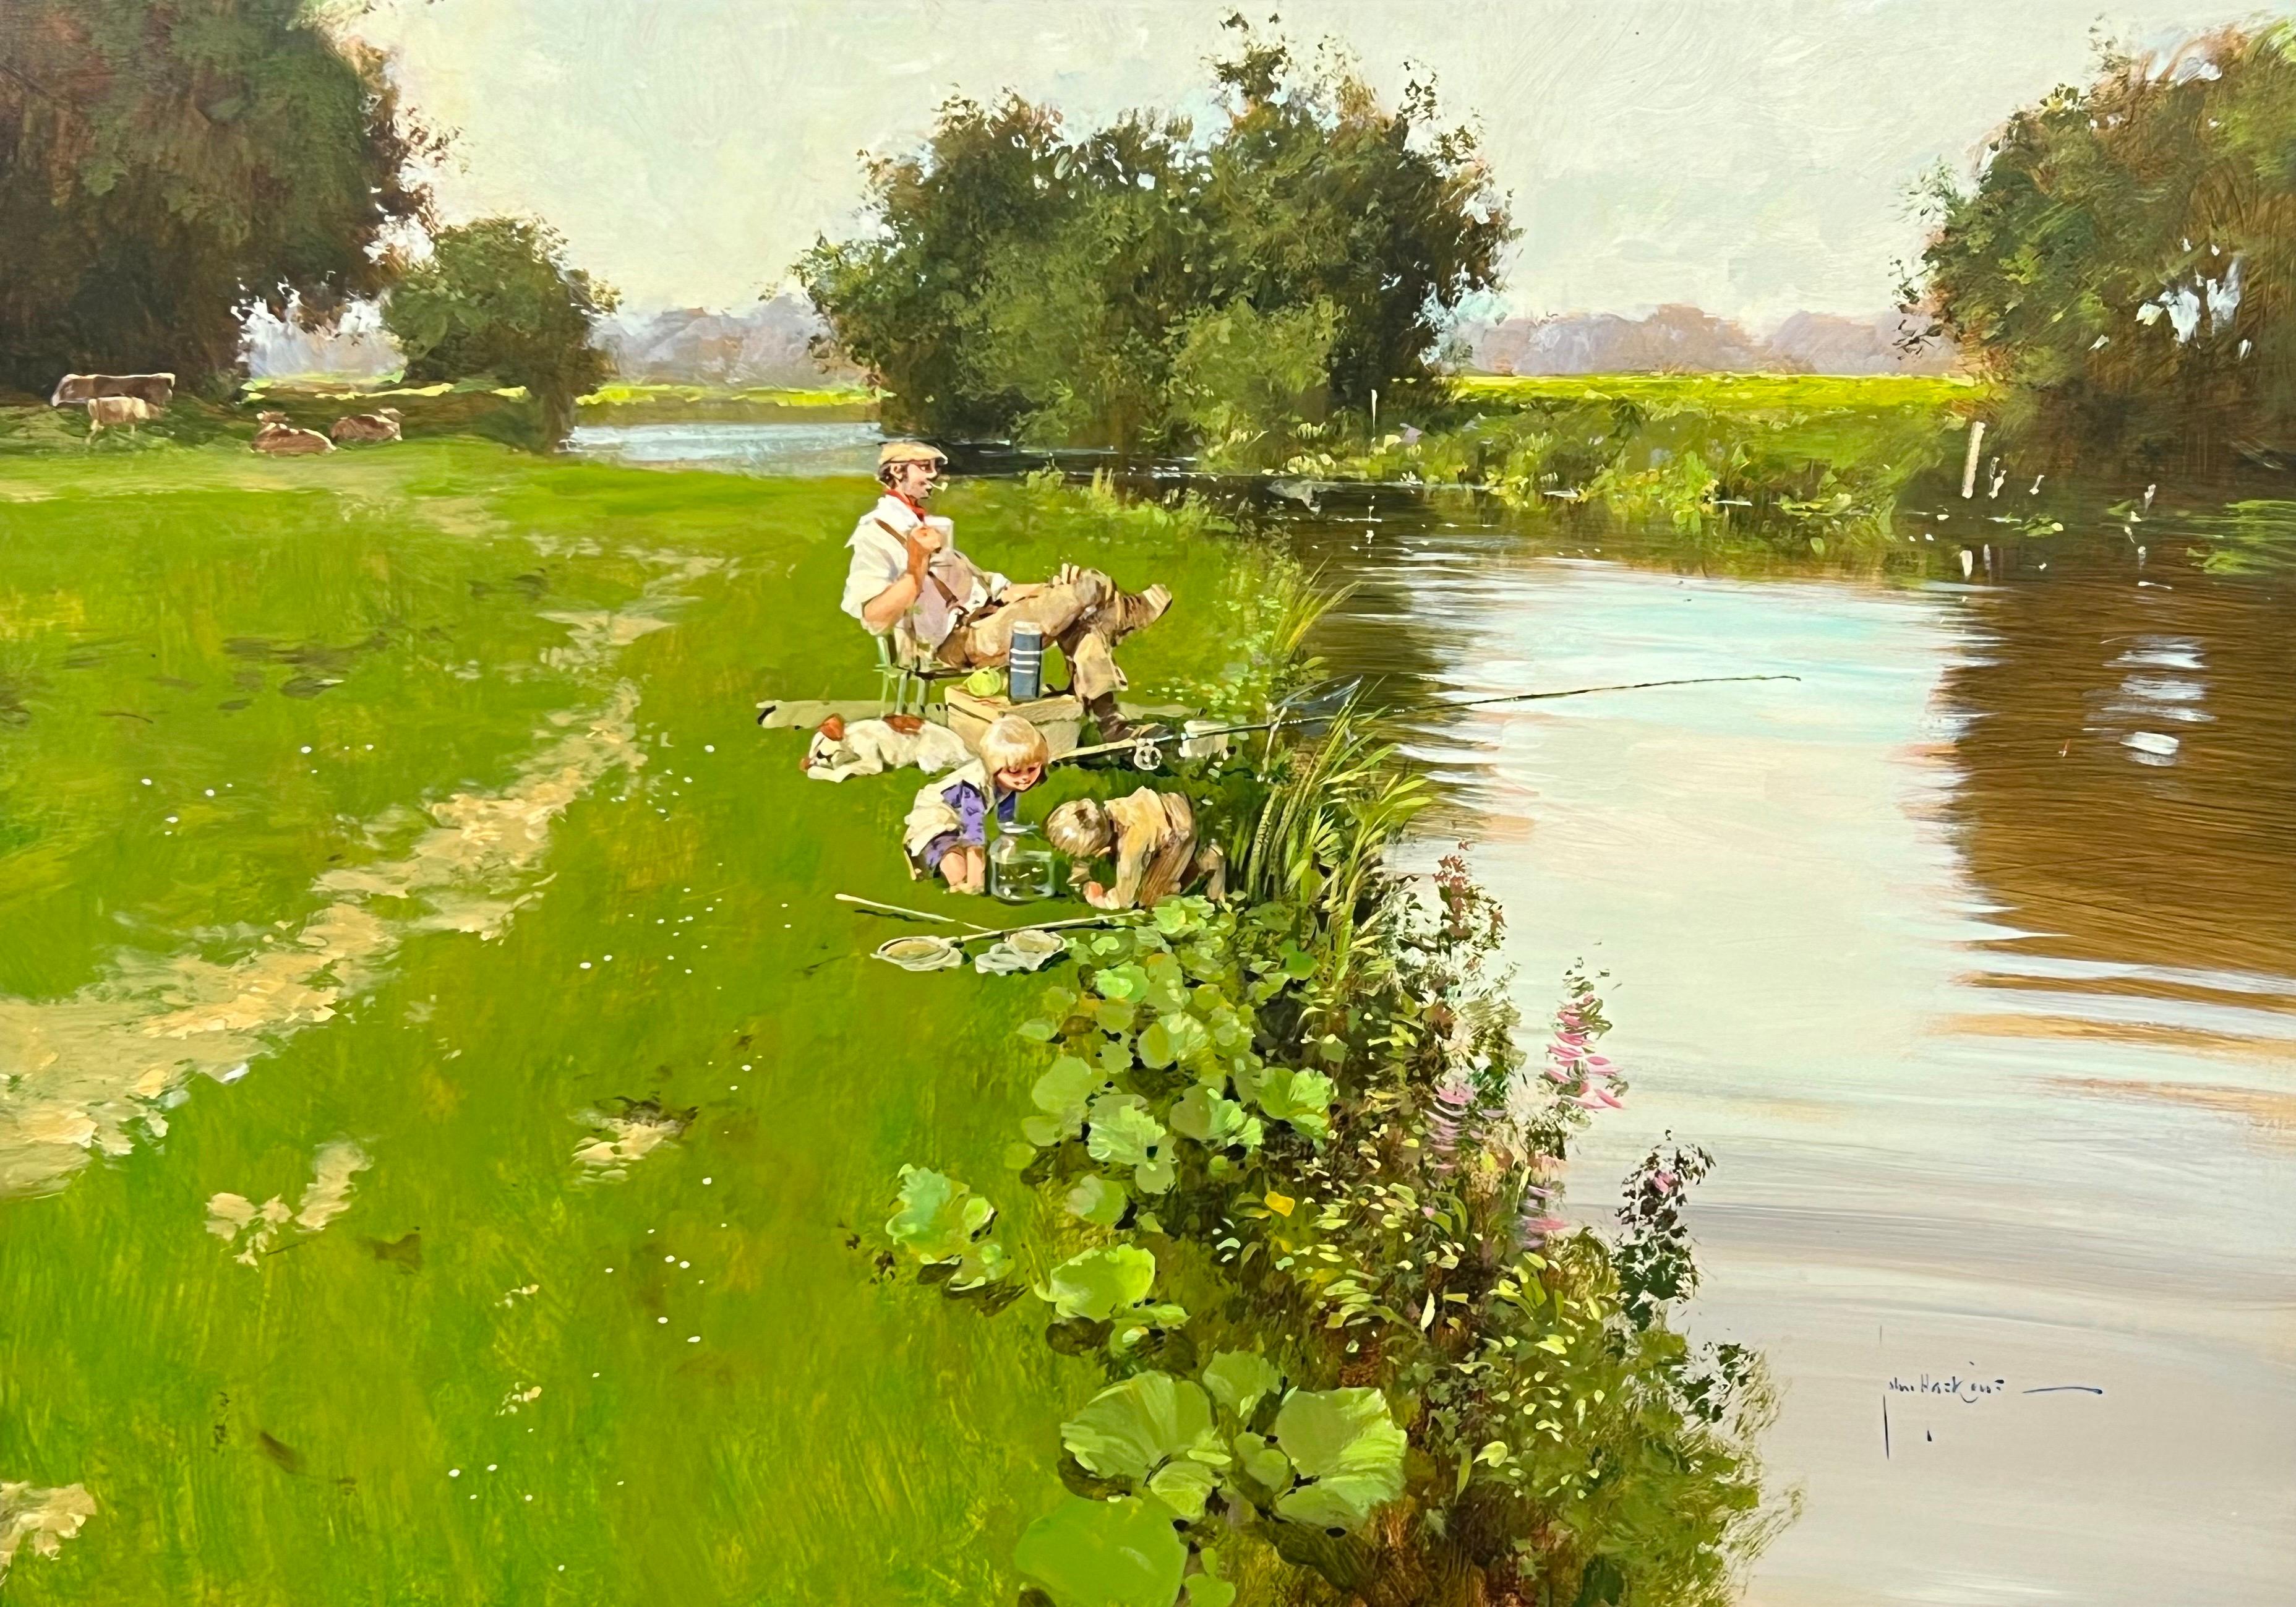 Man Fishing with Children Playing at a River Side in the English Countryside For Sale 5